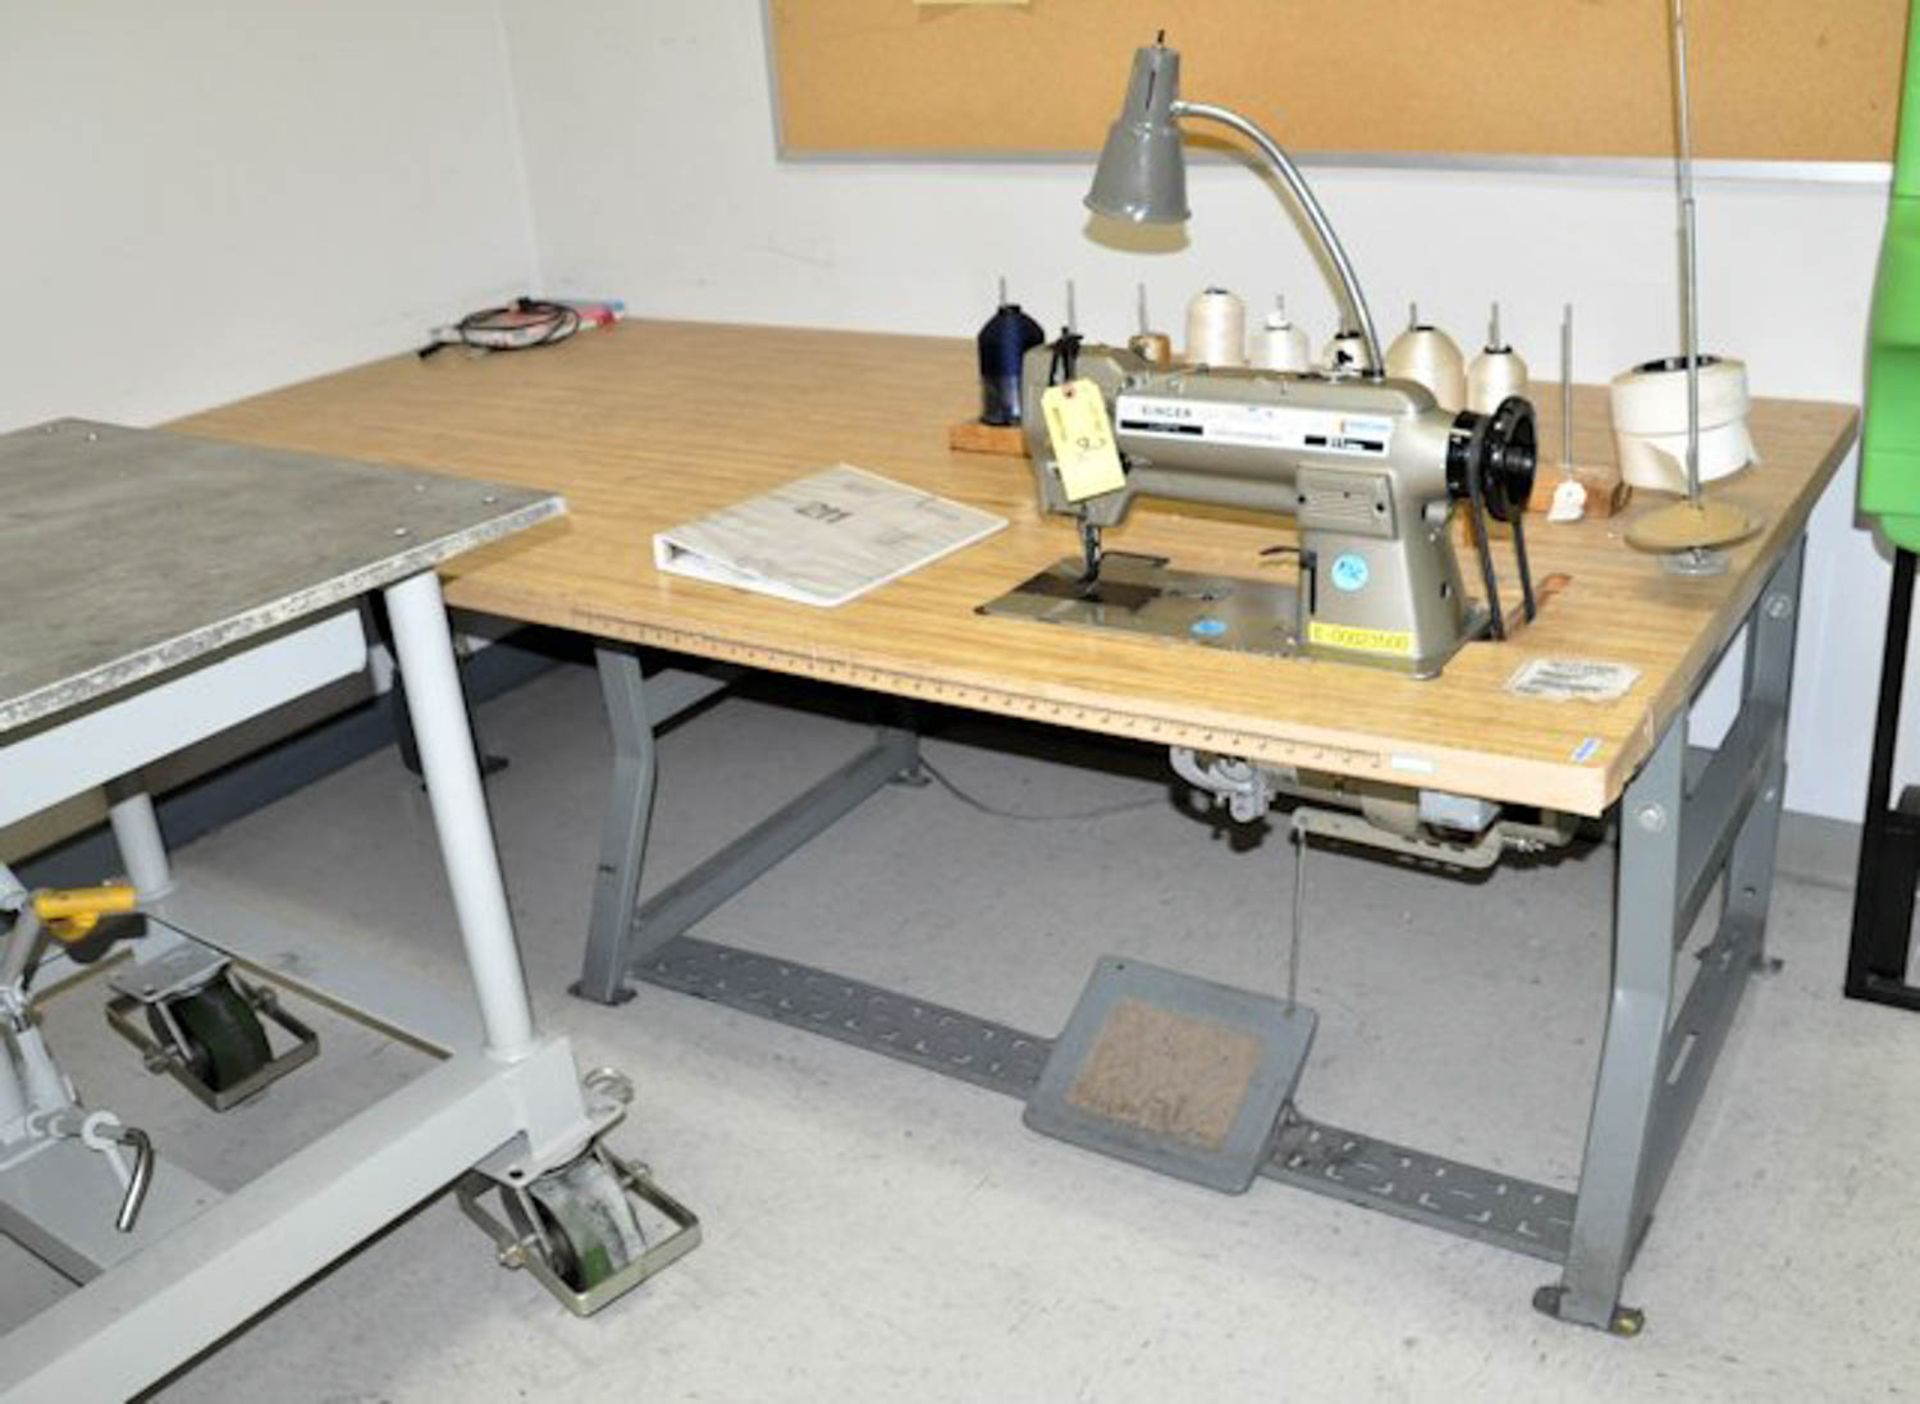 SINGER MODEL 211 SEWING MACHINE, S/N U834411107 WITH 96'' X 48'' TABLE - Image 2 of 2